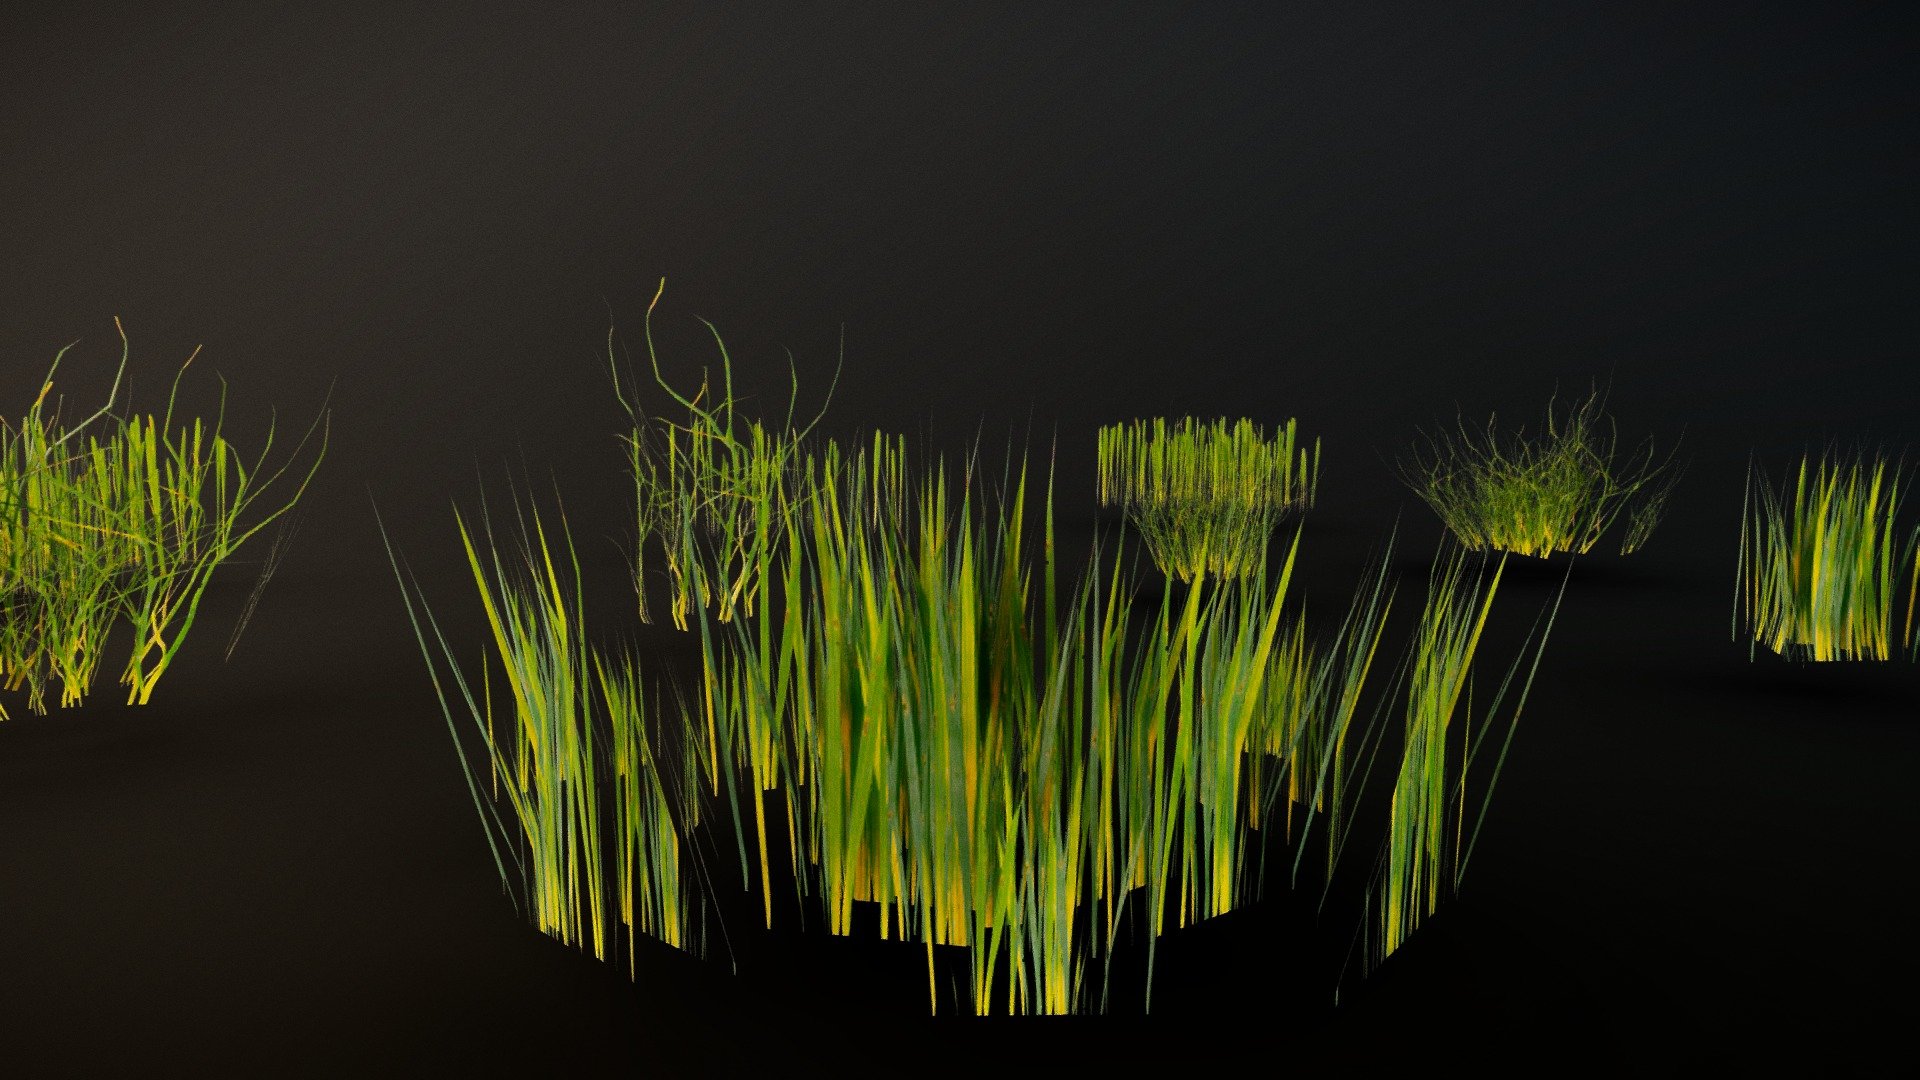 3 types of grass with different density and variations For Games .Enjoy and don't forget to like and follow for more free content!
.blend file included with all the textures in it.
Thank You - Realistic Grass Pack For Games Free! - Download Free 3D model by Nicholas-3D (@Nicholas01) 3d model